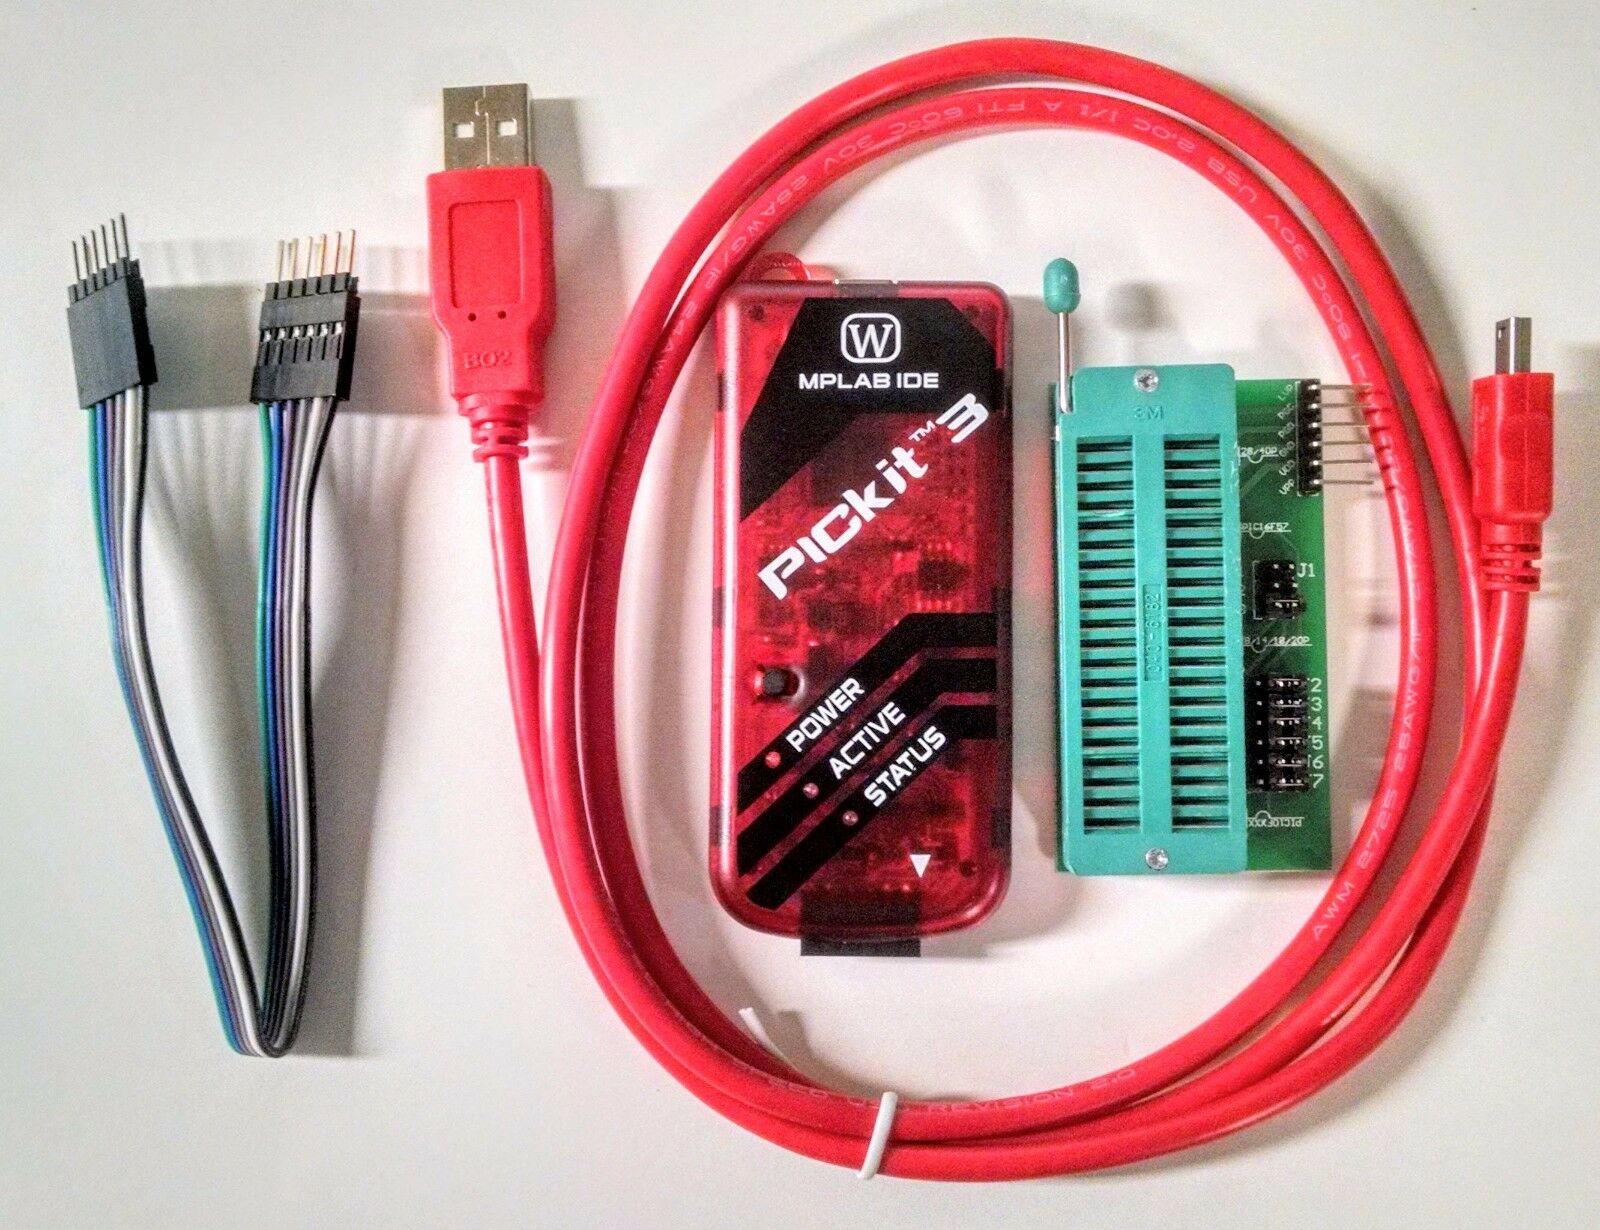 Pickit3 Microchip Programmer W/ Usb Cable, Wires Pic Kit 3 And Icsp Socket